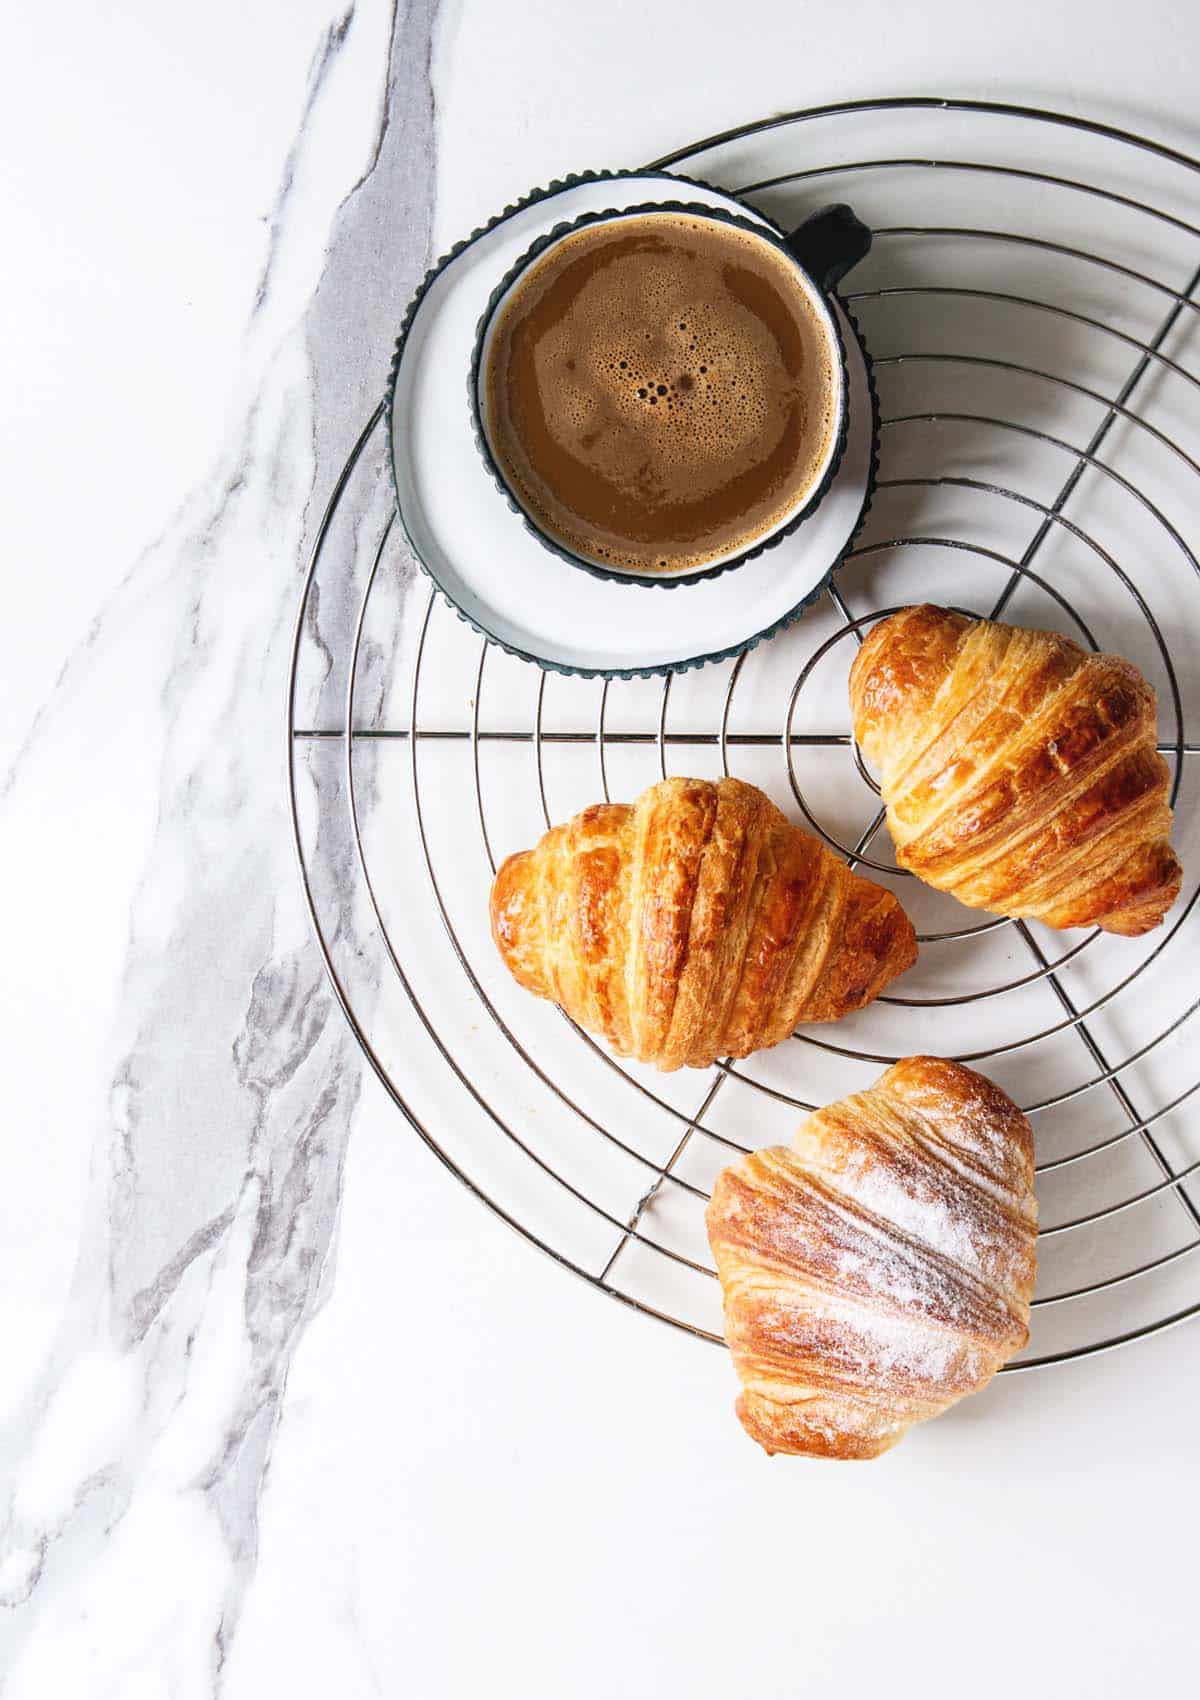 Pastries are a treasured special treat for me; I love the flaky, buttery deliciousness of indulging in a decent pastry. But what is the difference between crescent rolls and croissants?